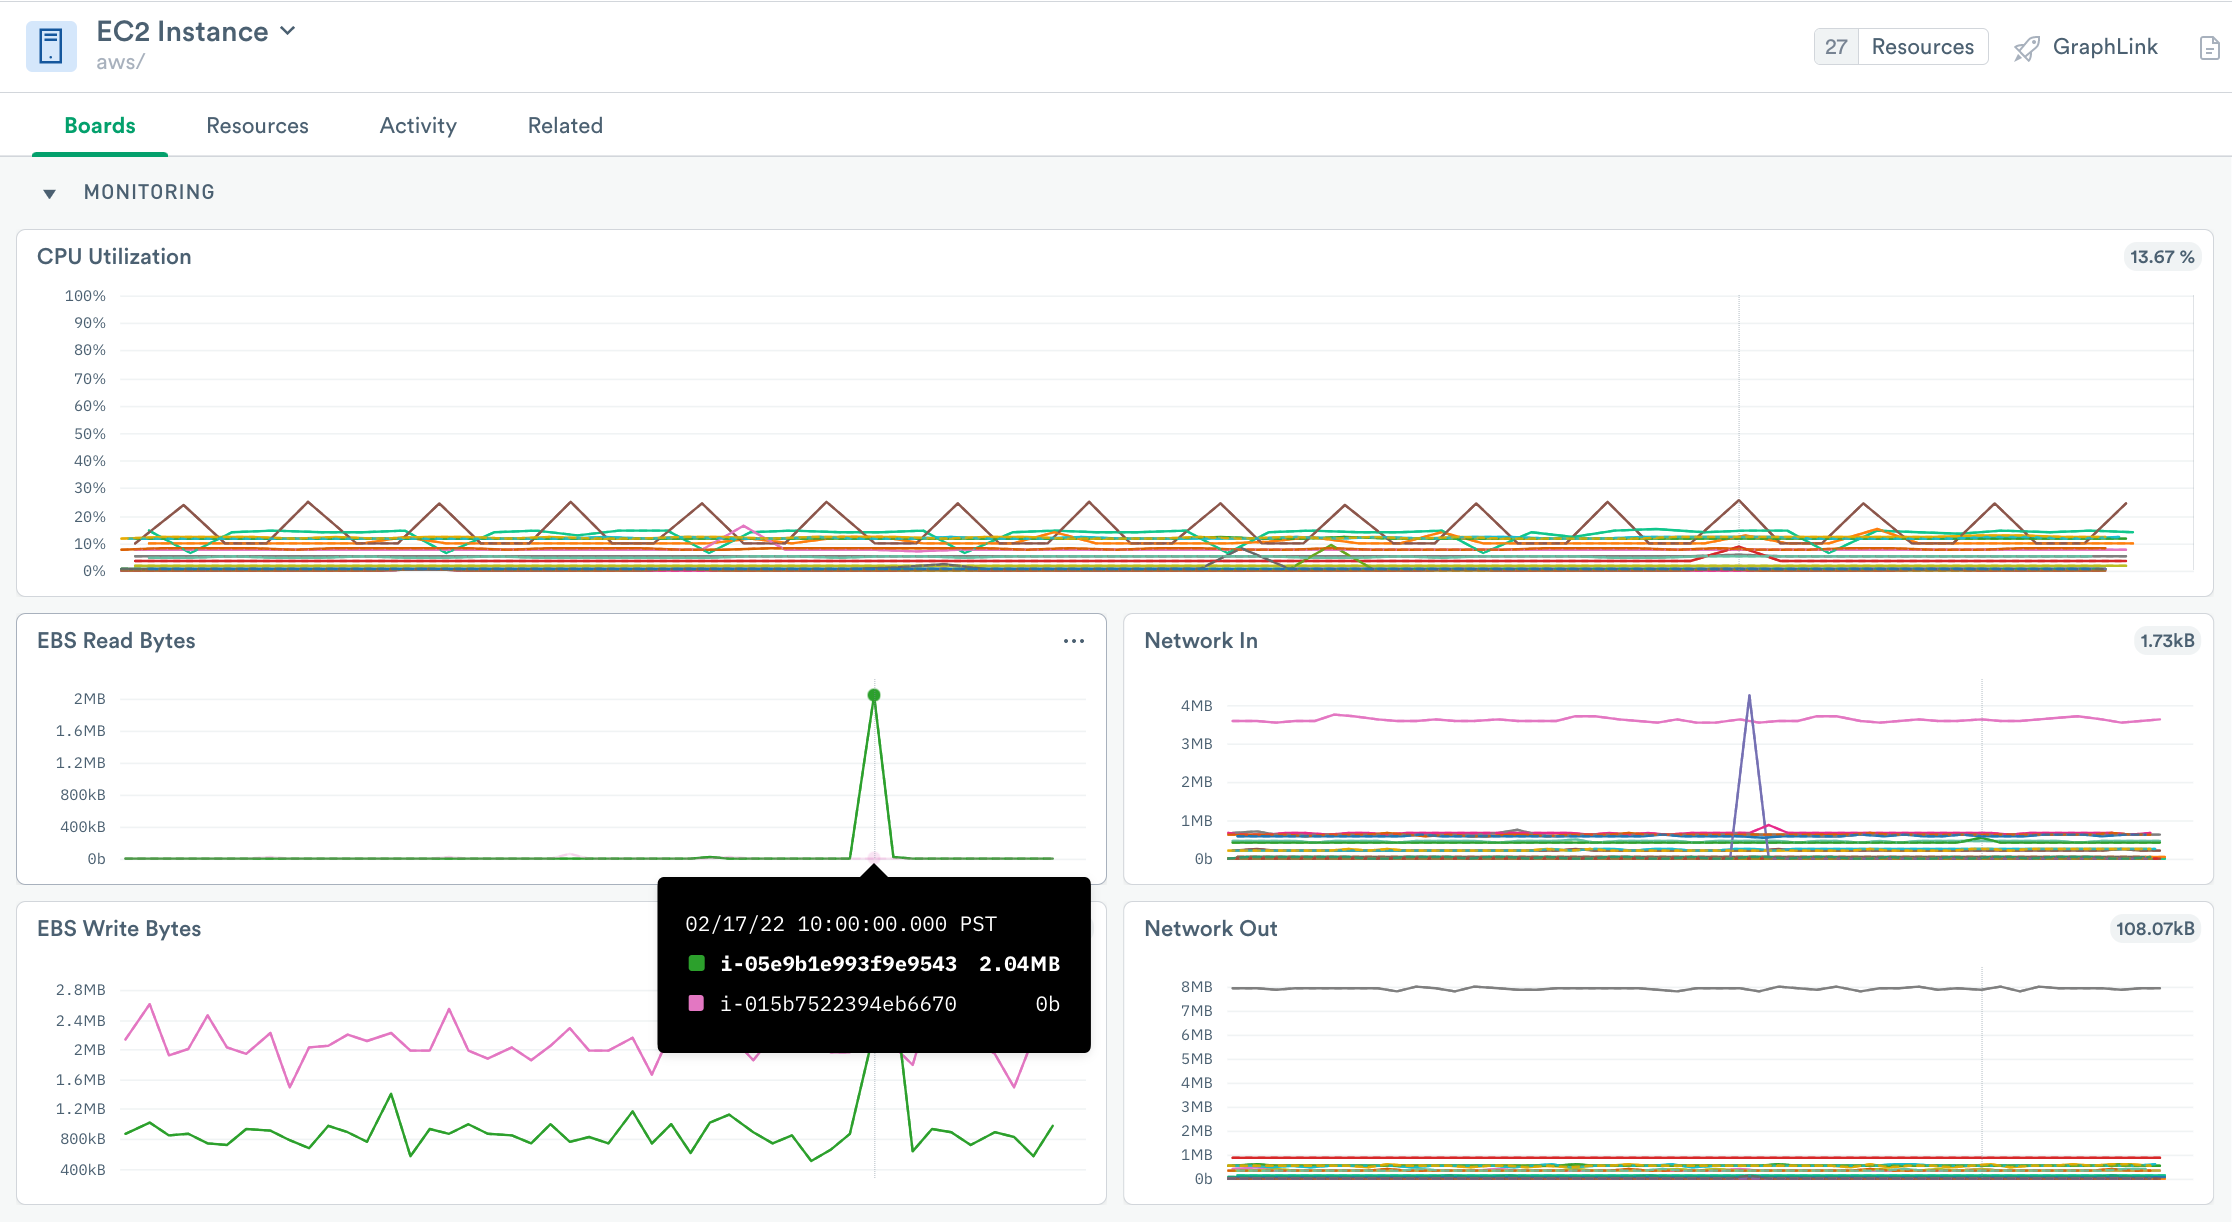 Additional visualization cards on the EC2 Monitoring board. CPU utilization, EBS Read Bytes, EBS Write Bytes, Network In, Network Out. A popup shows details of a spike in EBS Read Bytes, available by hovering over a point in the chart.